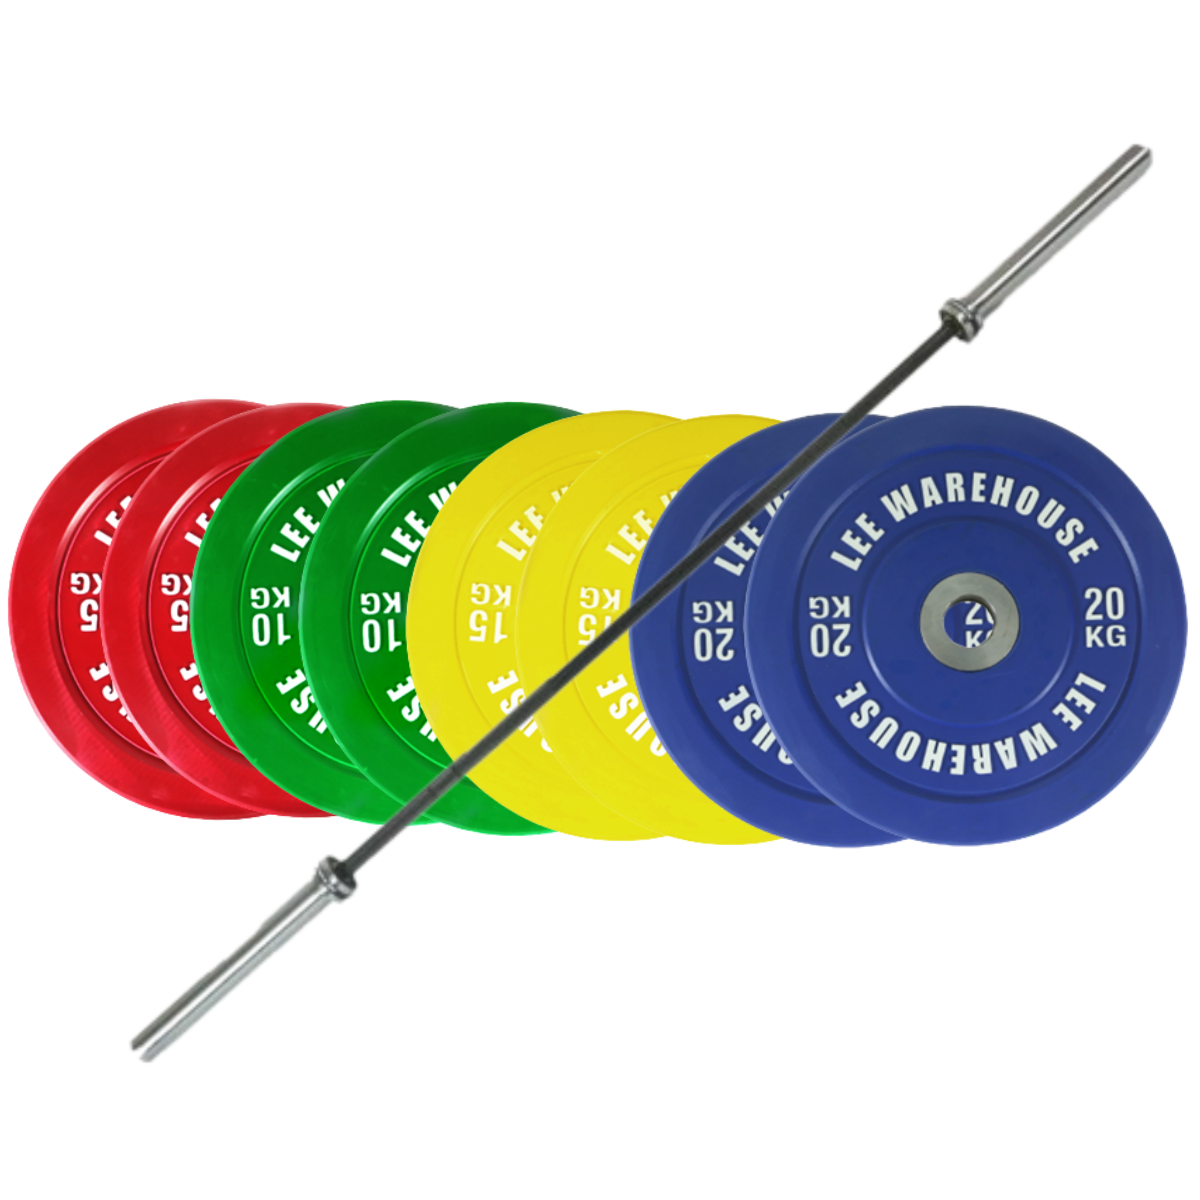 100KG Bumper Weight Plates and 20KG Barbell